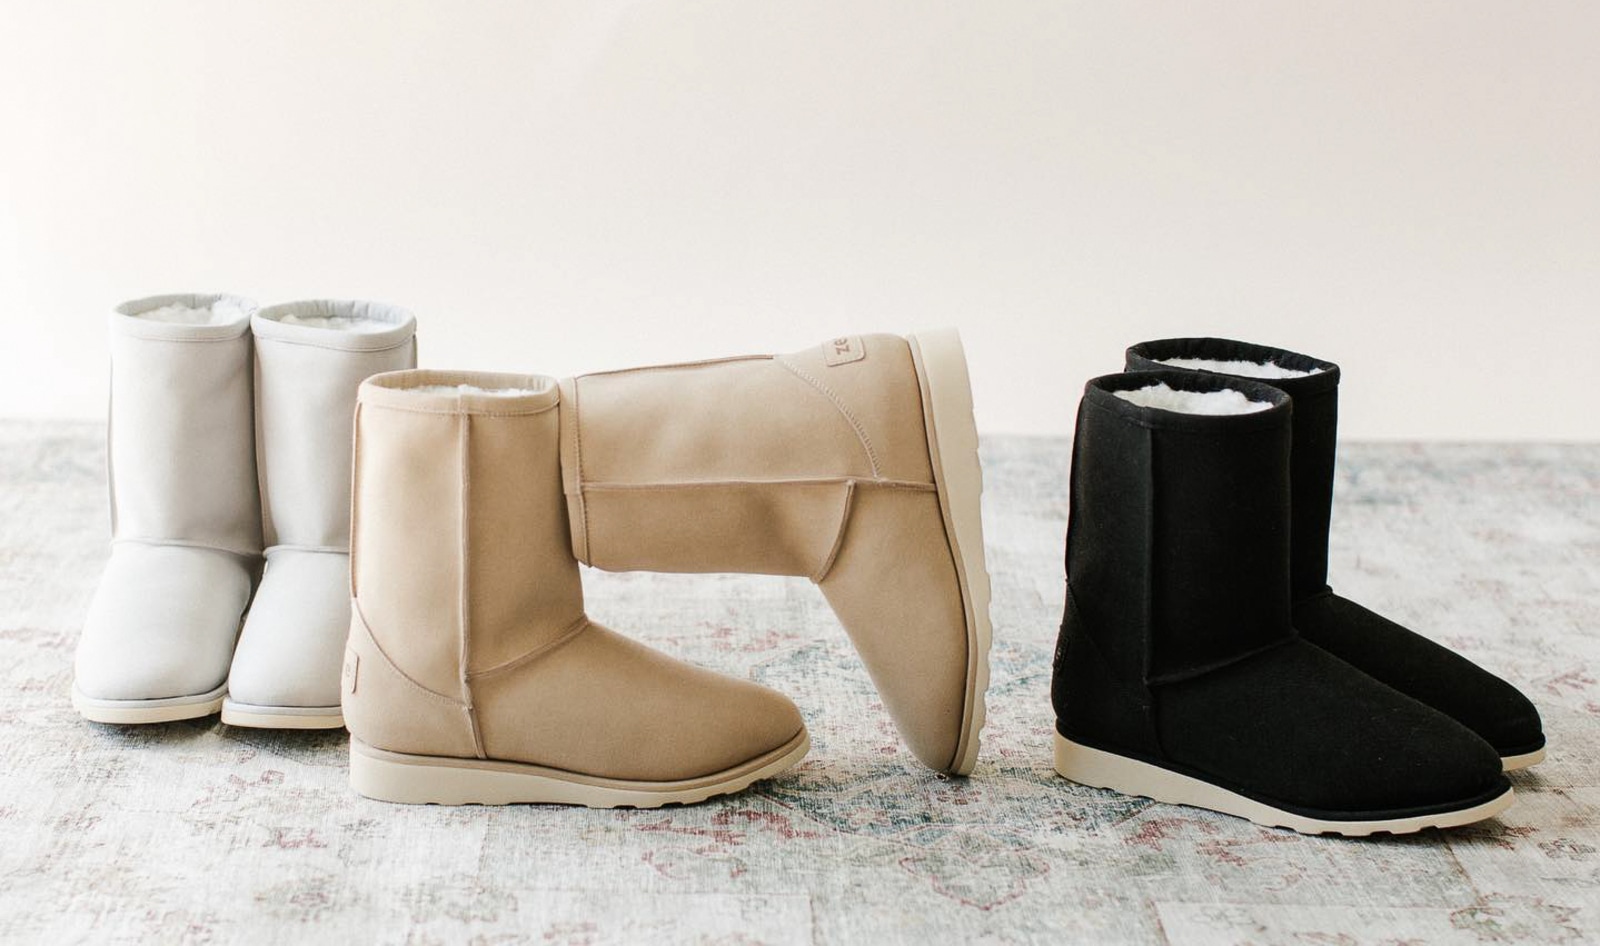 7 Vegan Ugg Boots to Your Feet Comfy, Cozy, Cruelty-Free | VegNews